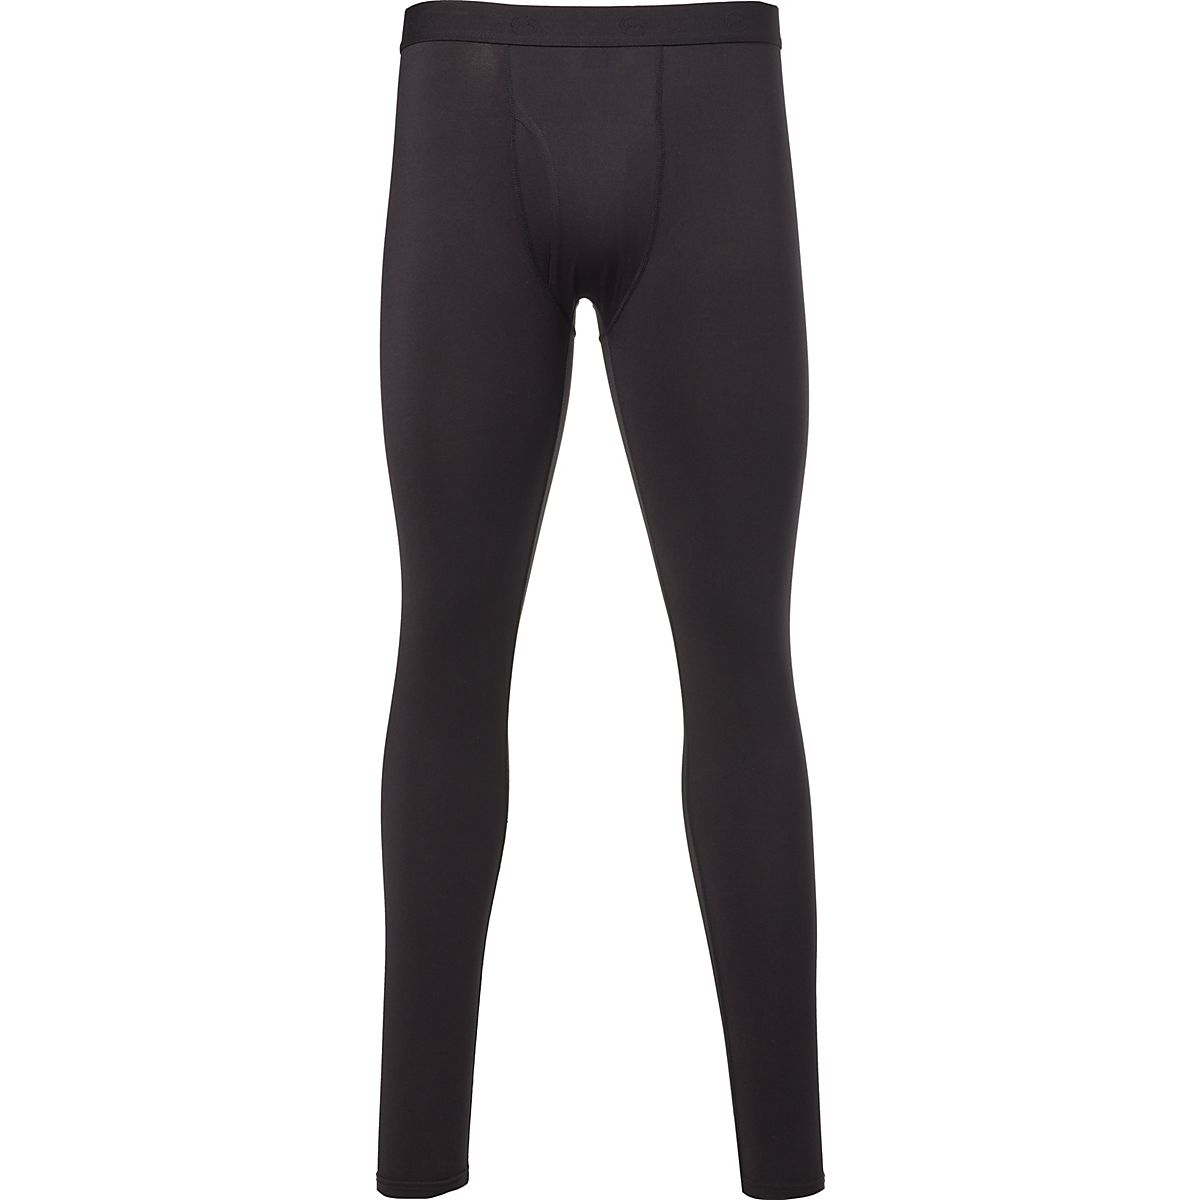 Magellan Outdoors Men's Thermal Stretch Baselayer Pants | Academy